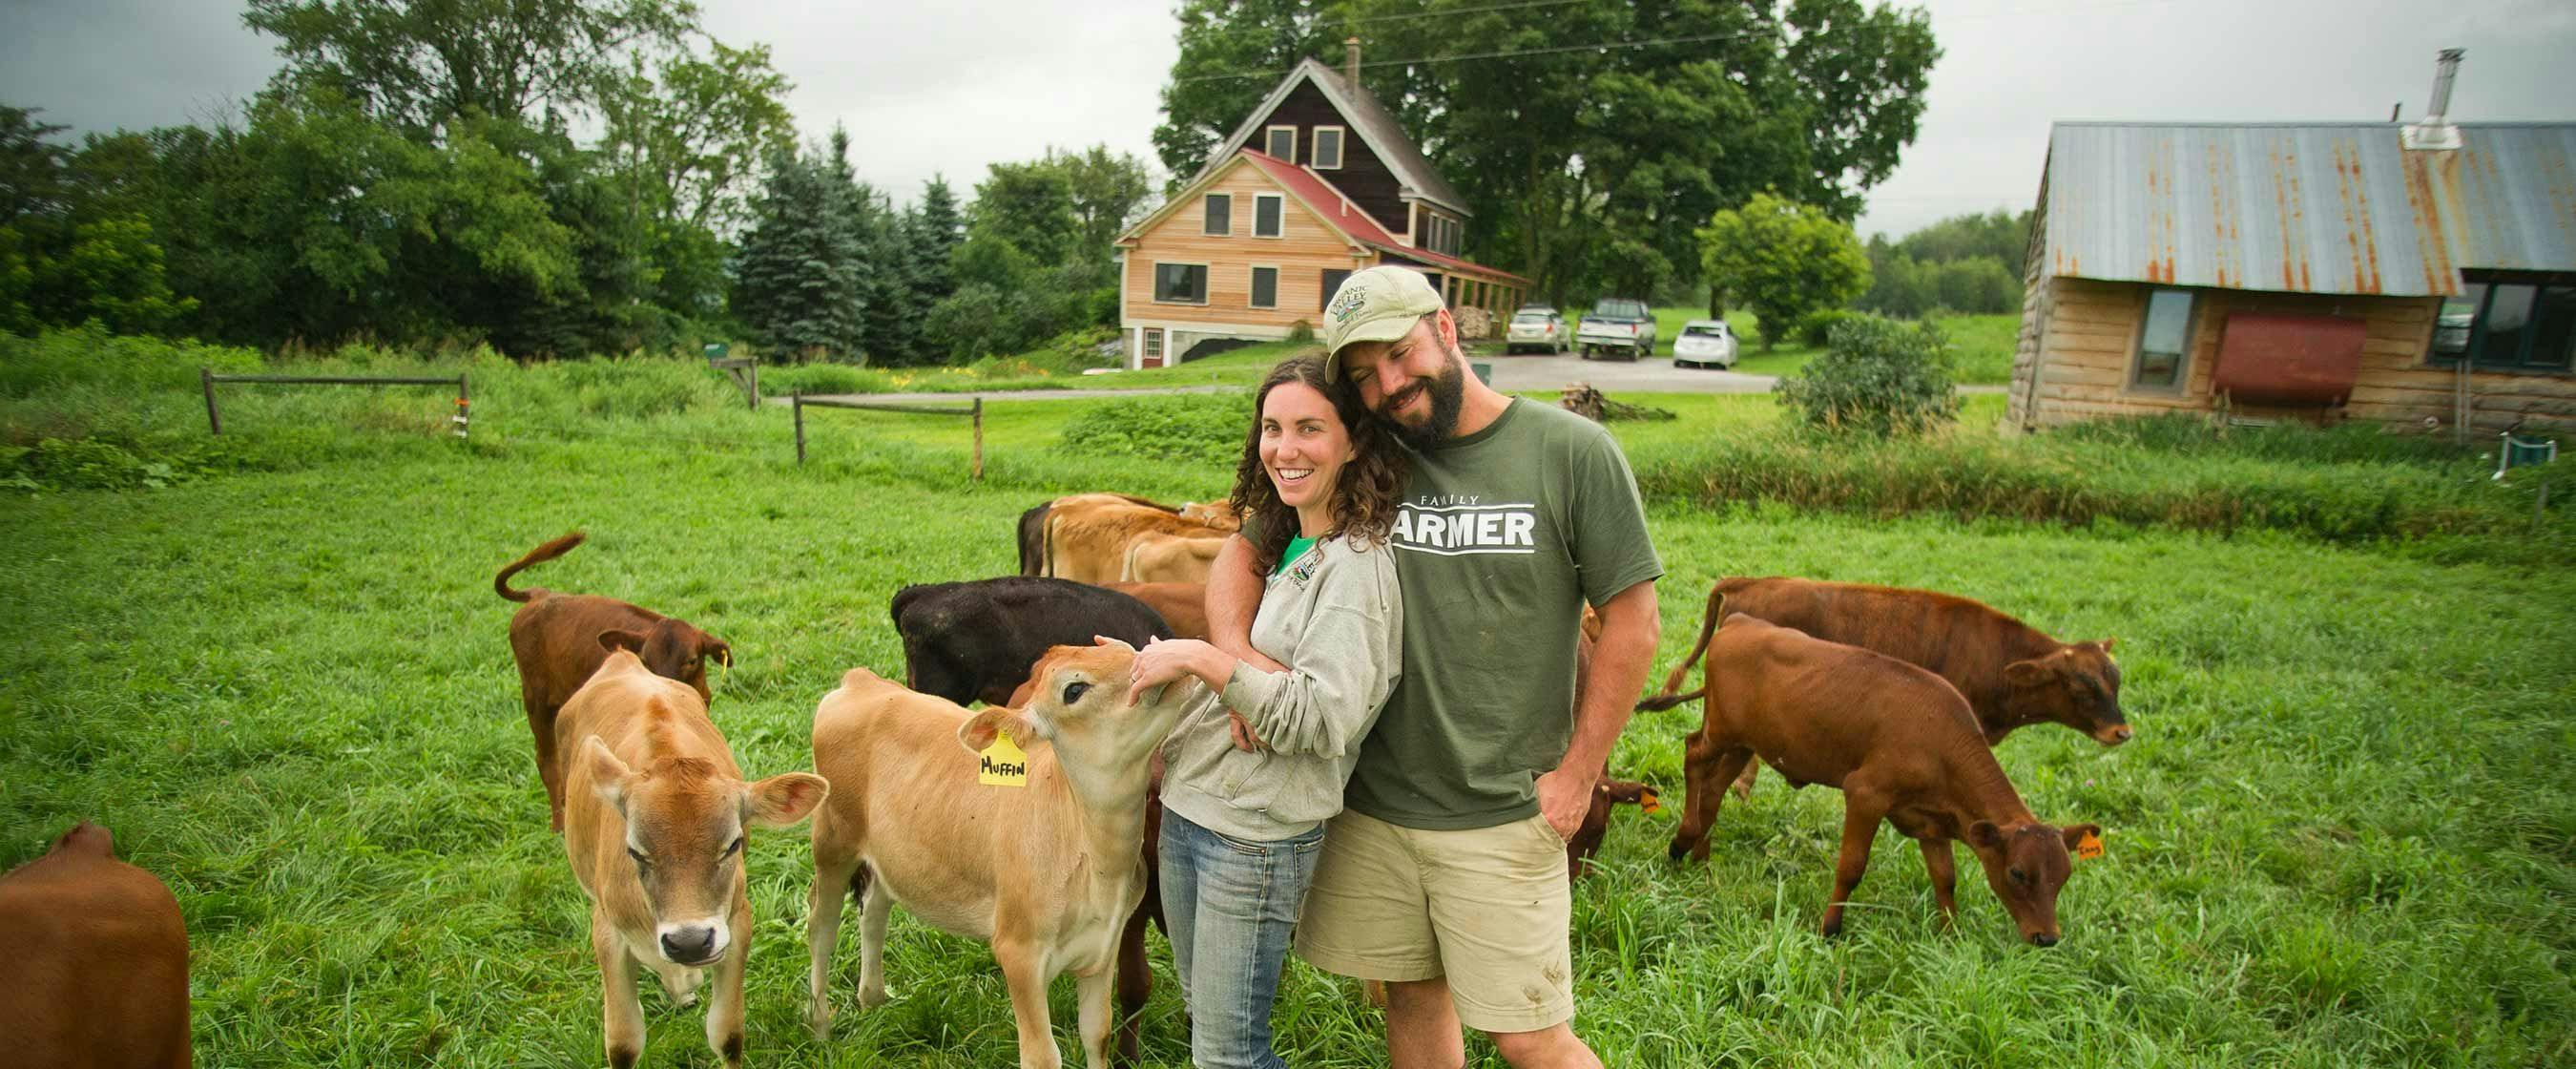 The Webb's on their Organic Valley family farm in Vermont.